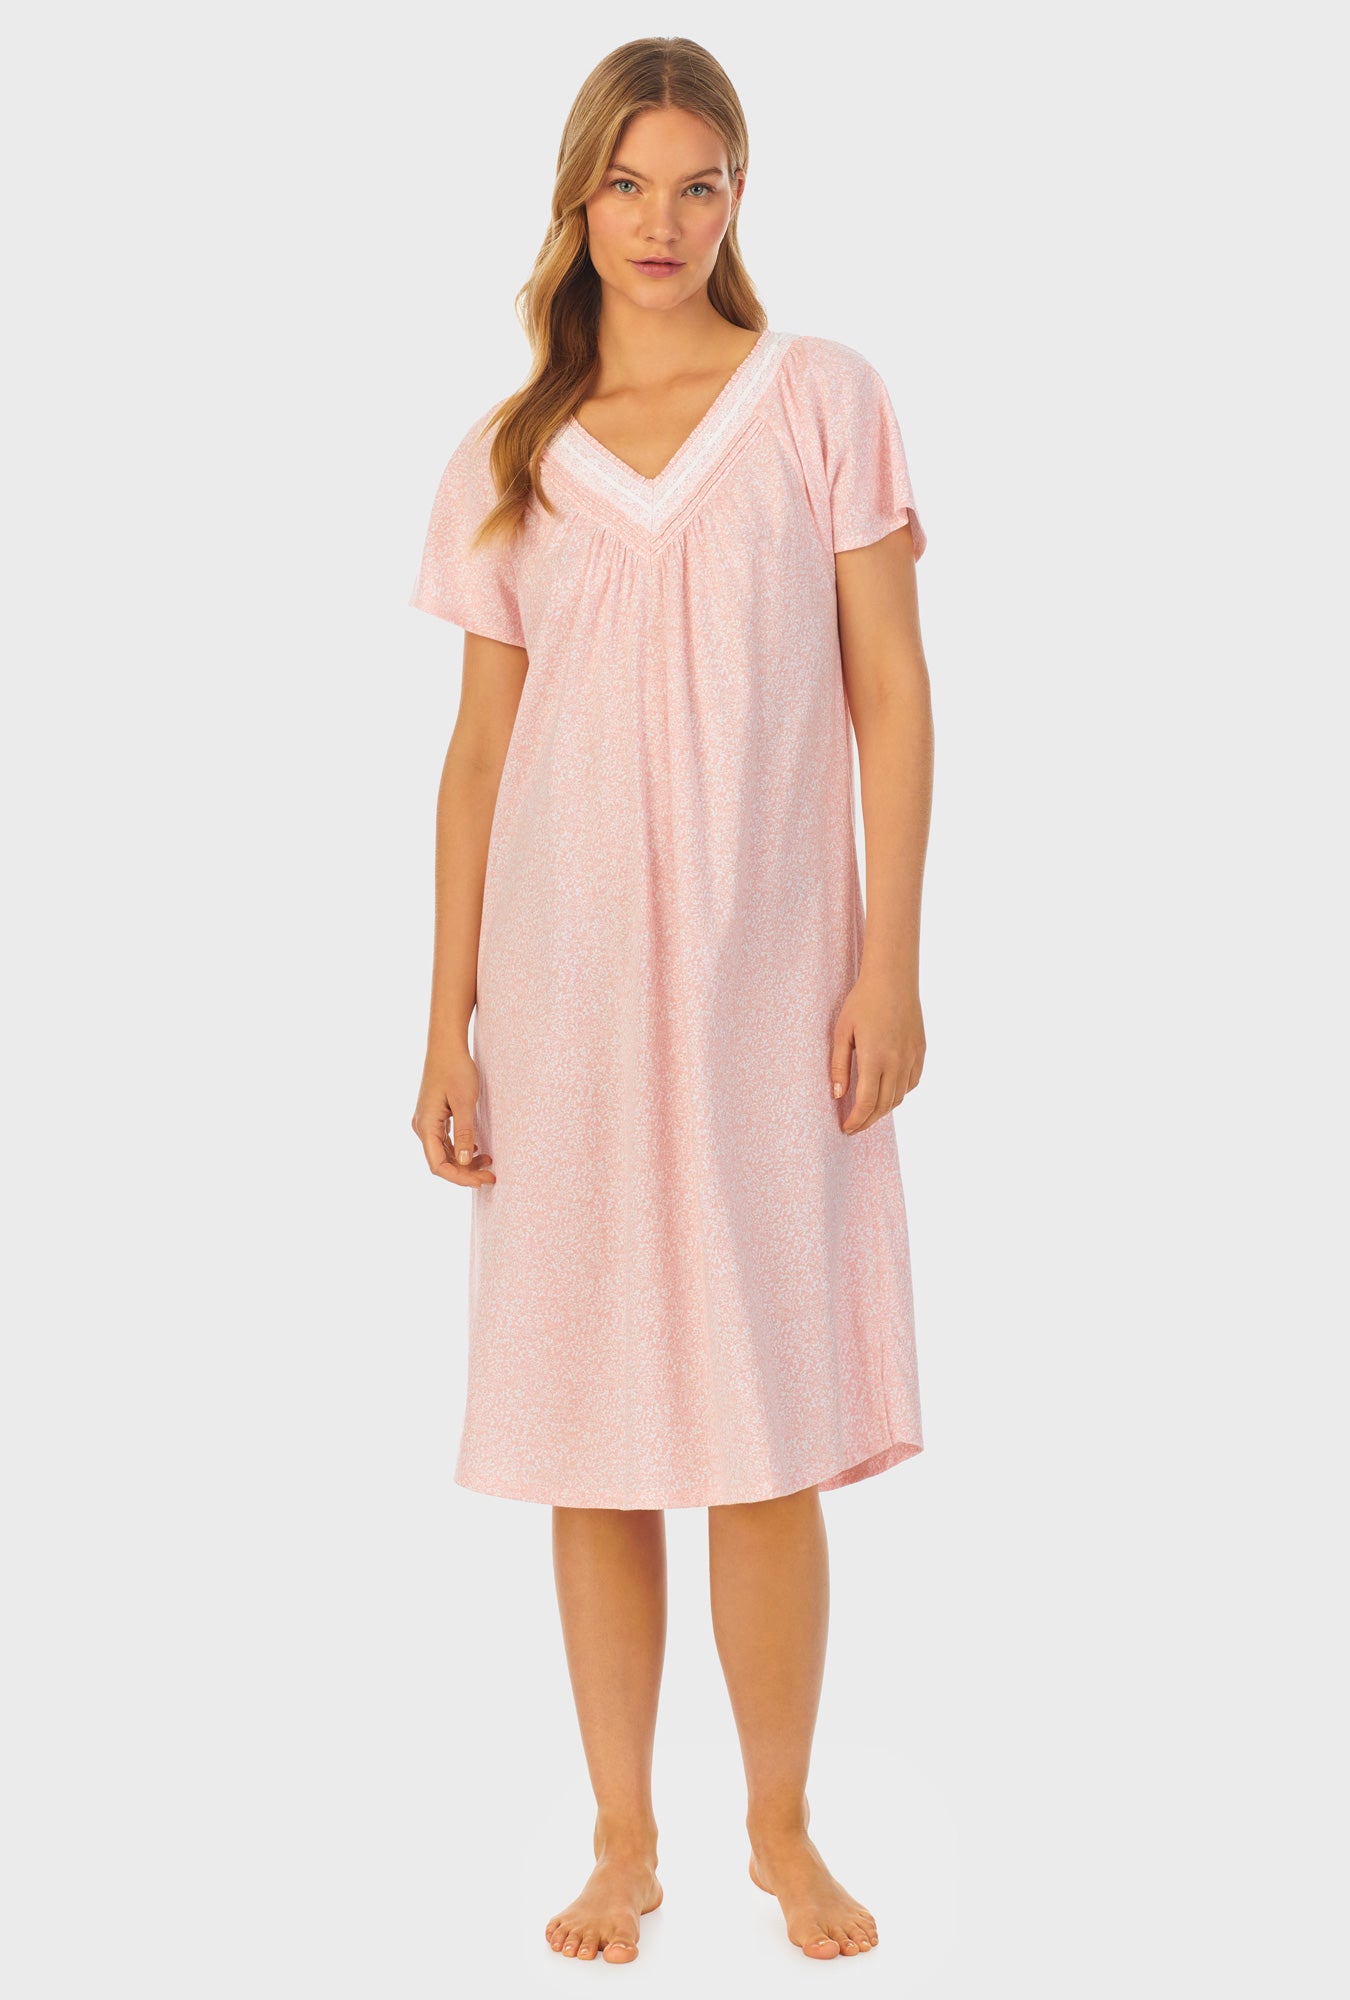 A lady wearing orange short sleeve Cotton Waltz Nightgown with Floral Vine print